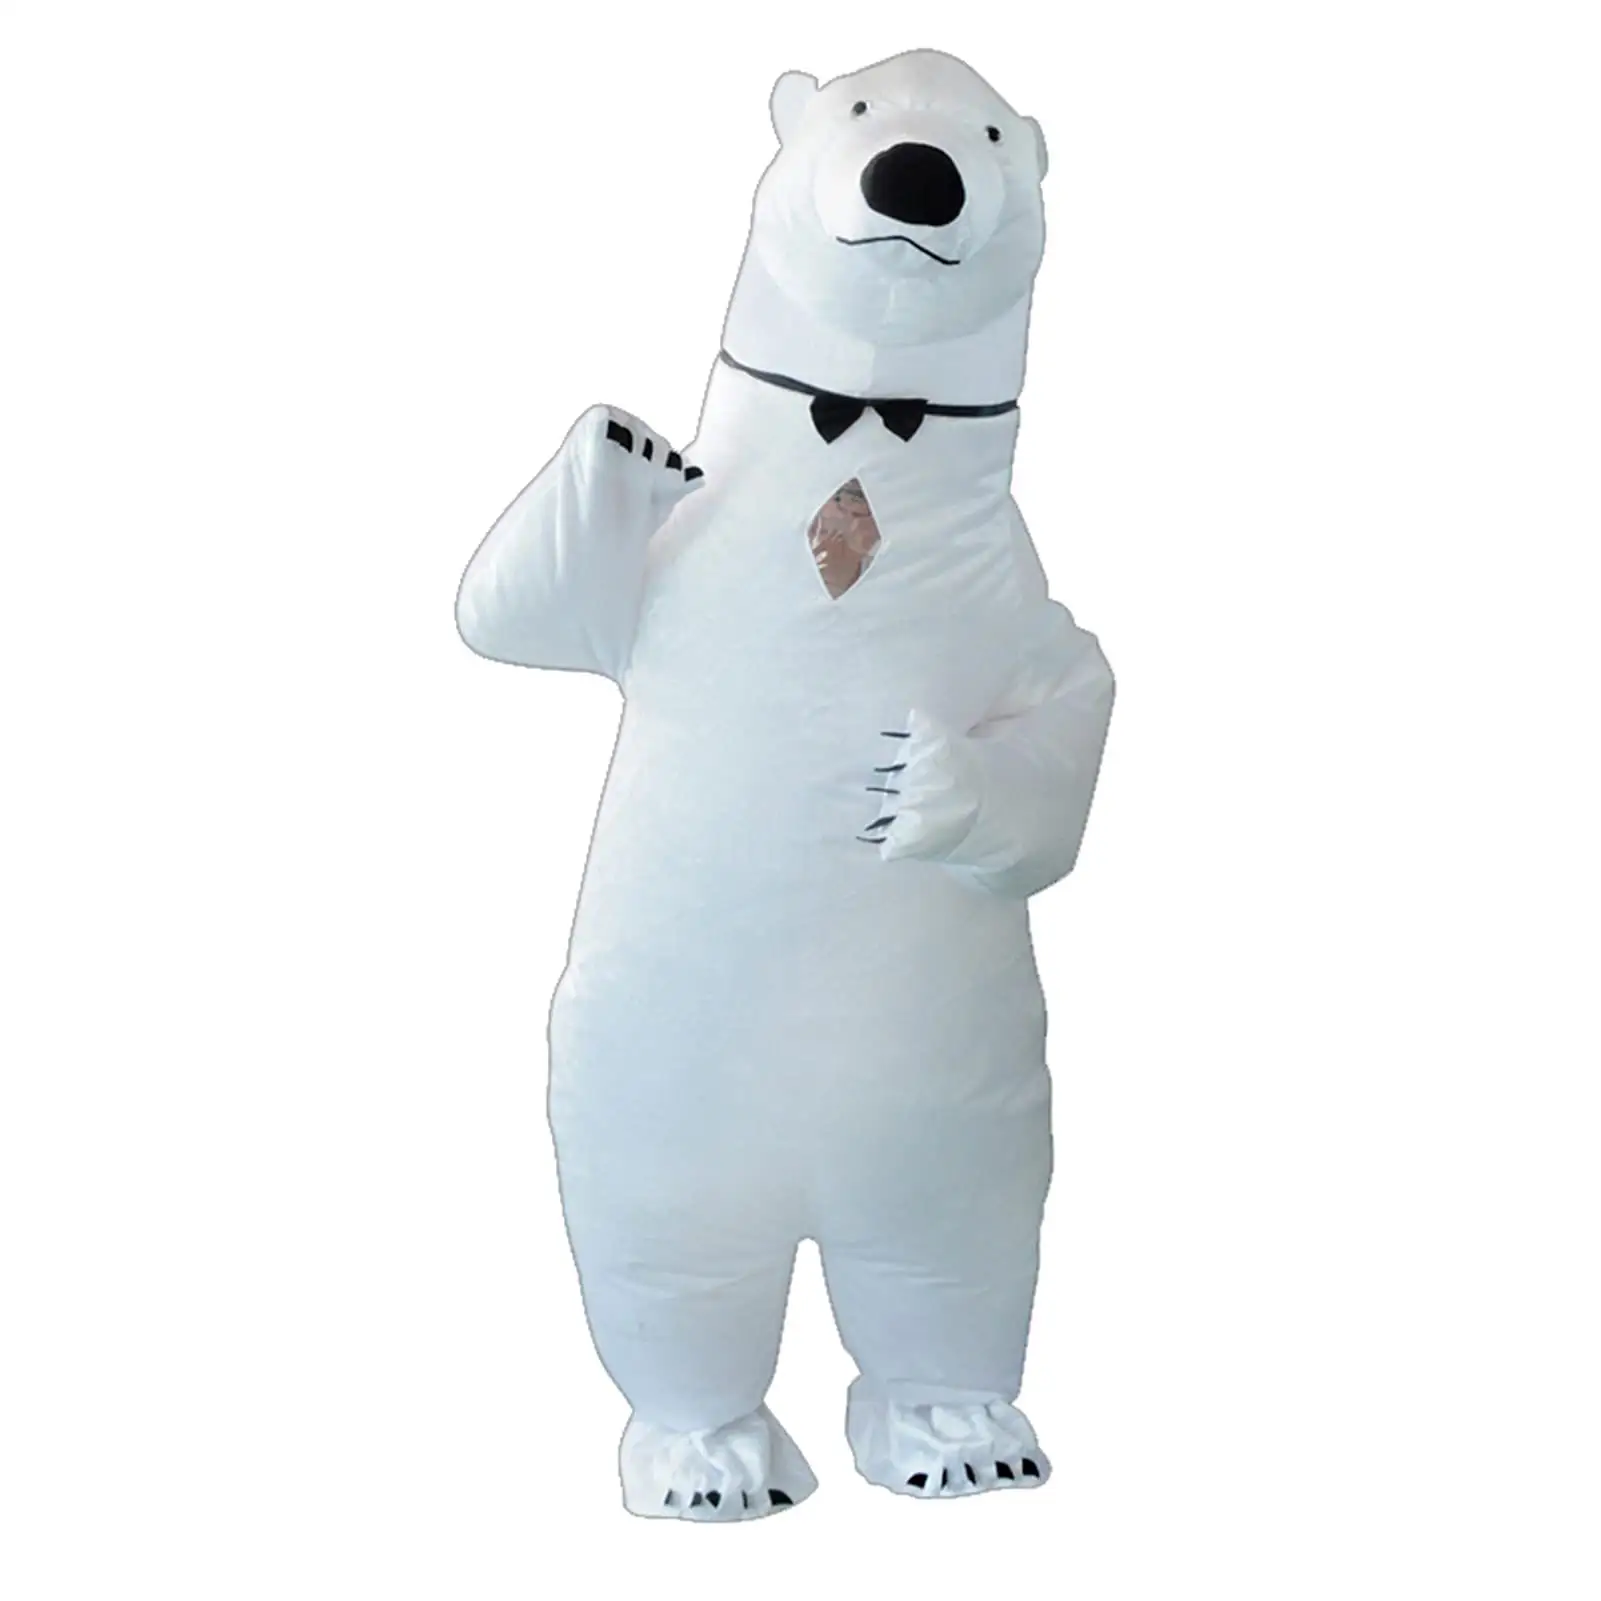 Adult Funny Animal Inflatable Giant White Polar Bear Cosplay Blow-up Mascot Halloween Carnival Party Costume